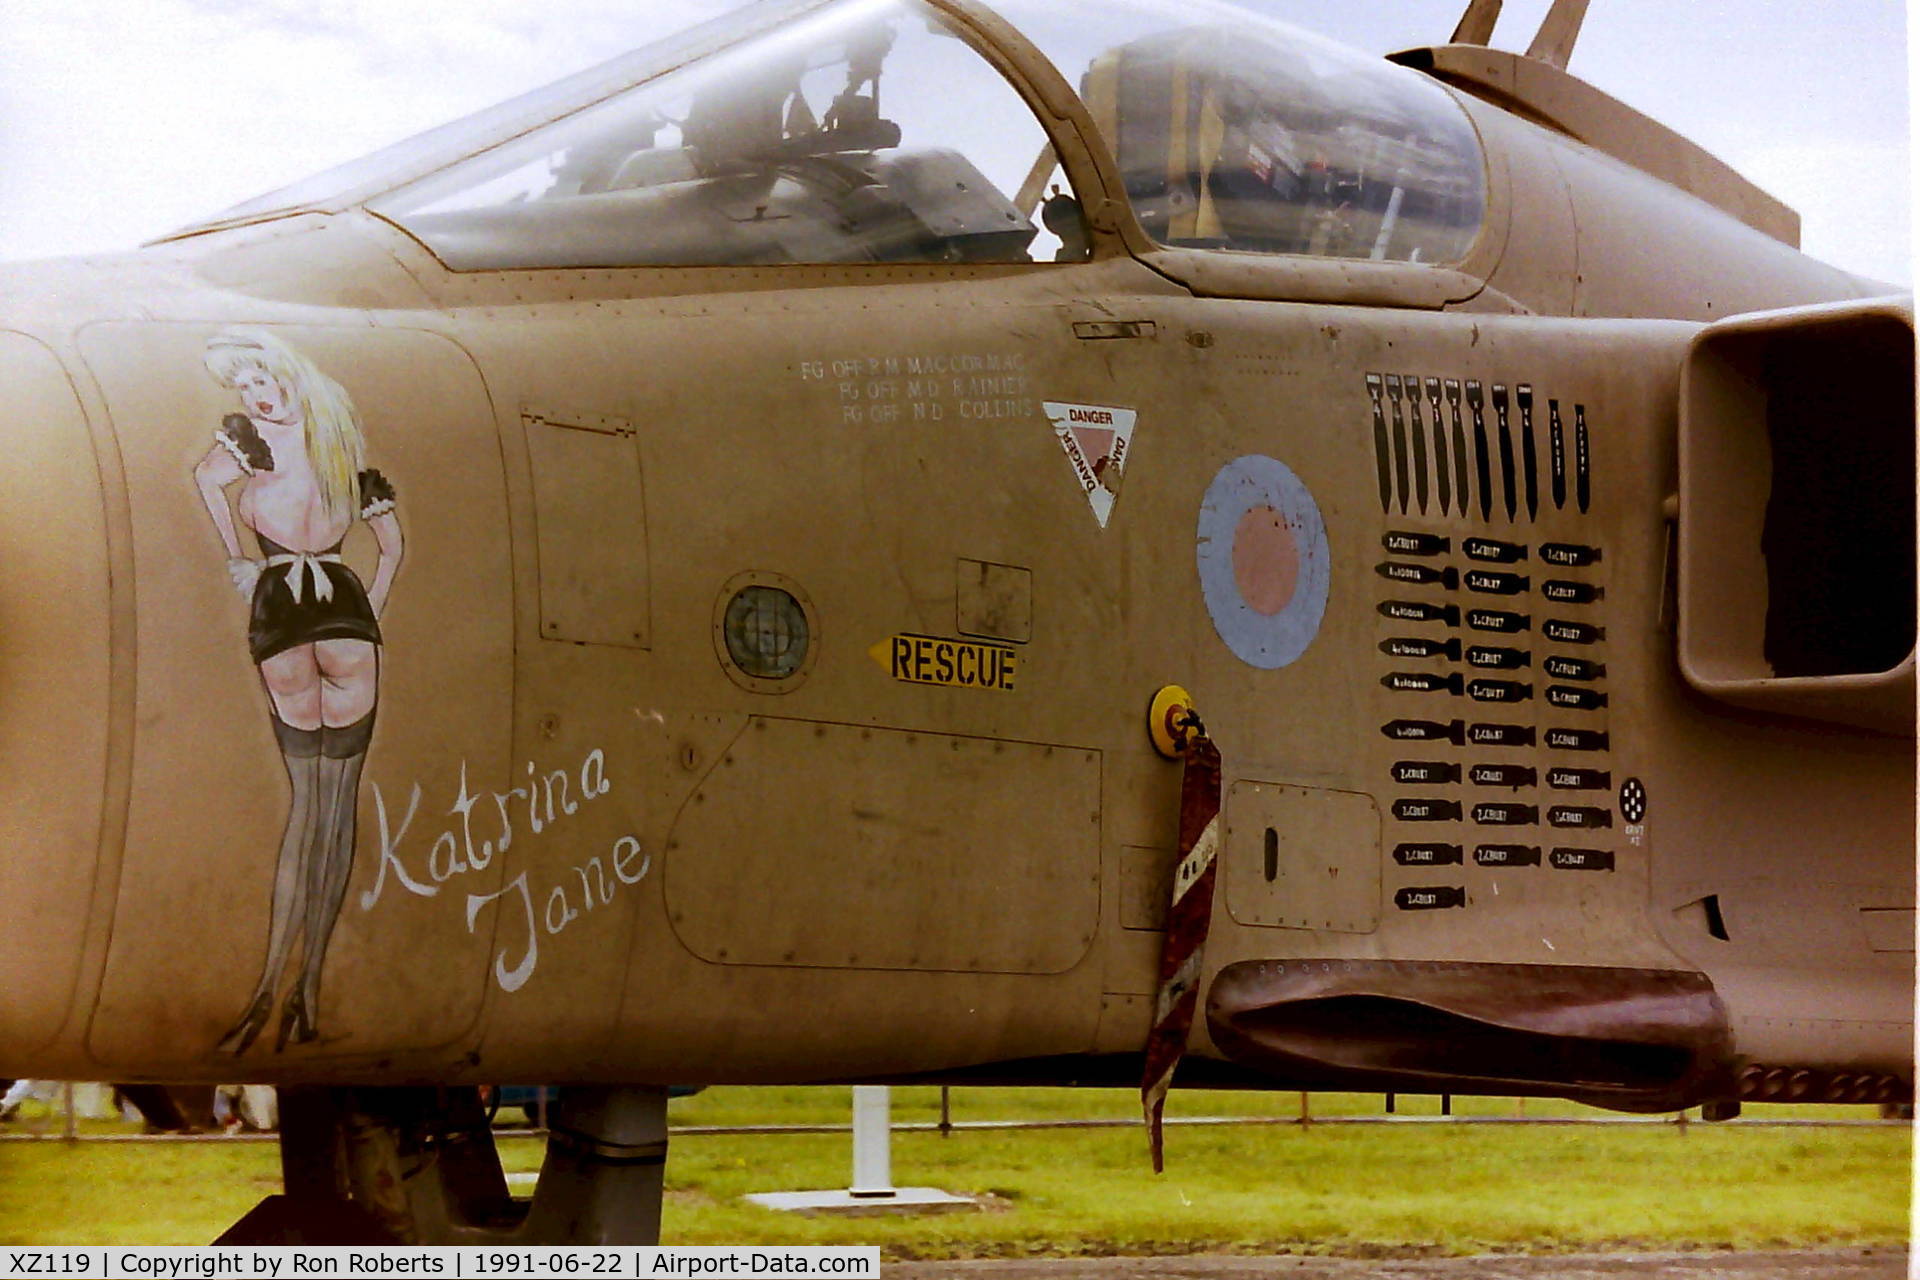 XZ119, 1976 Sepecat Jaguar GR.1A C/N S.120, Taken at Woodford Airshow 22/6/91 after the end of the first Gulf War.